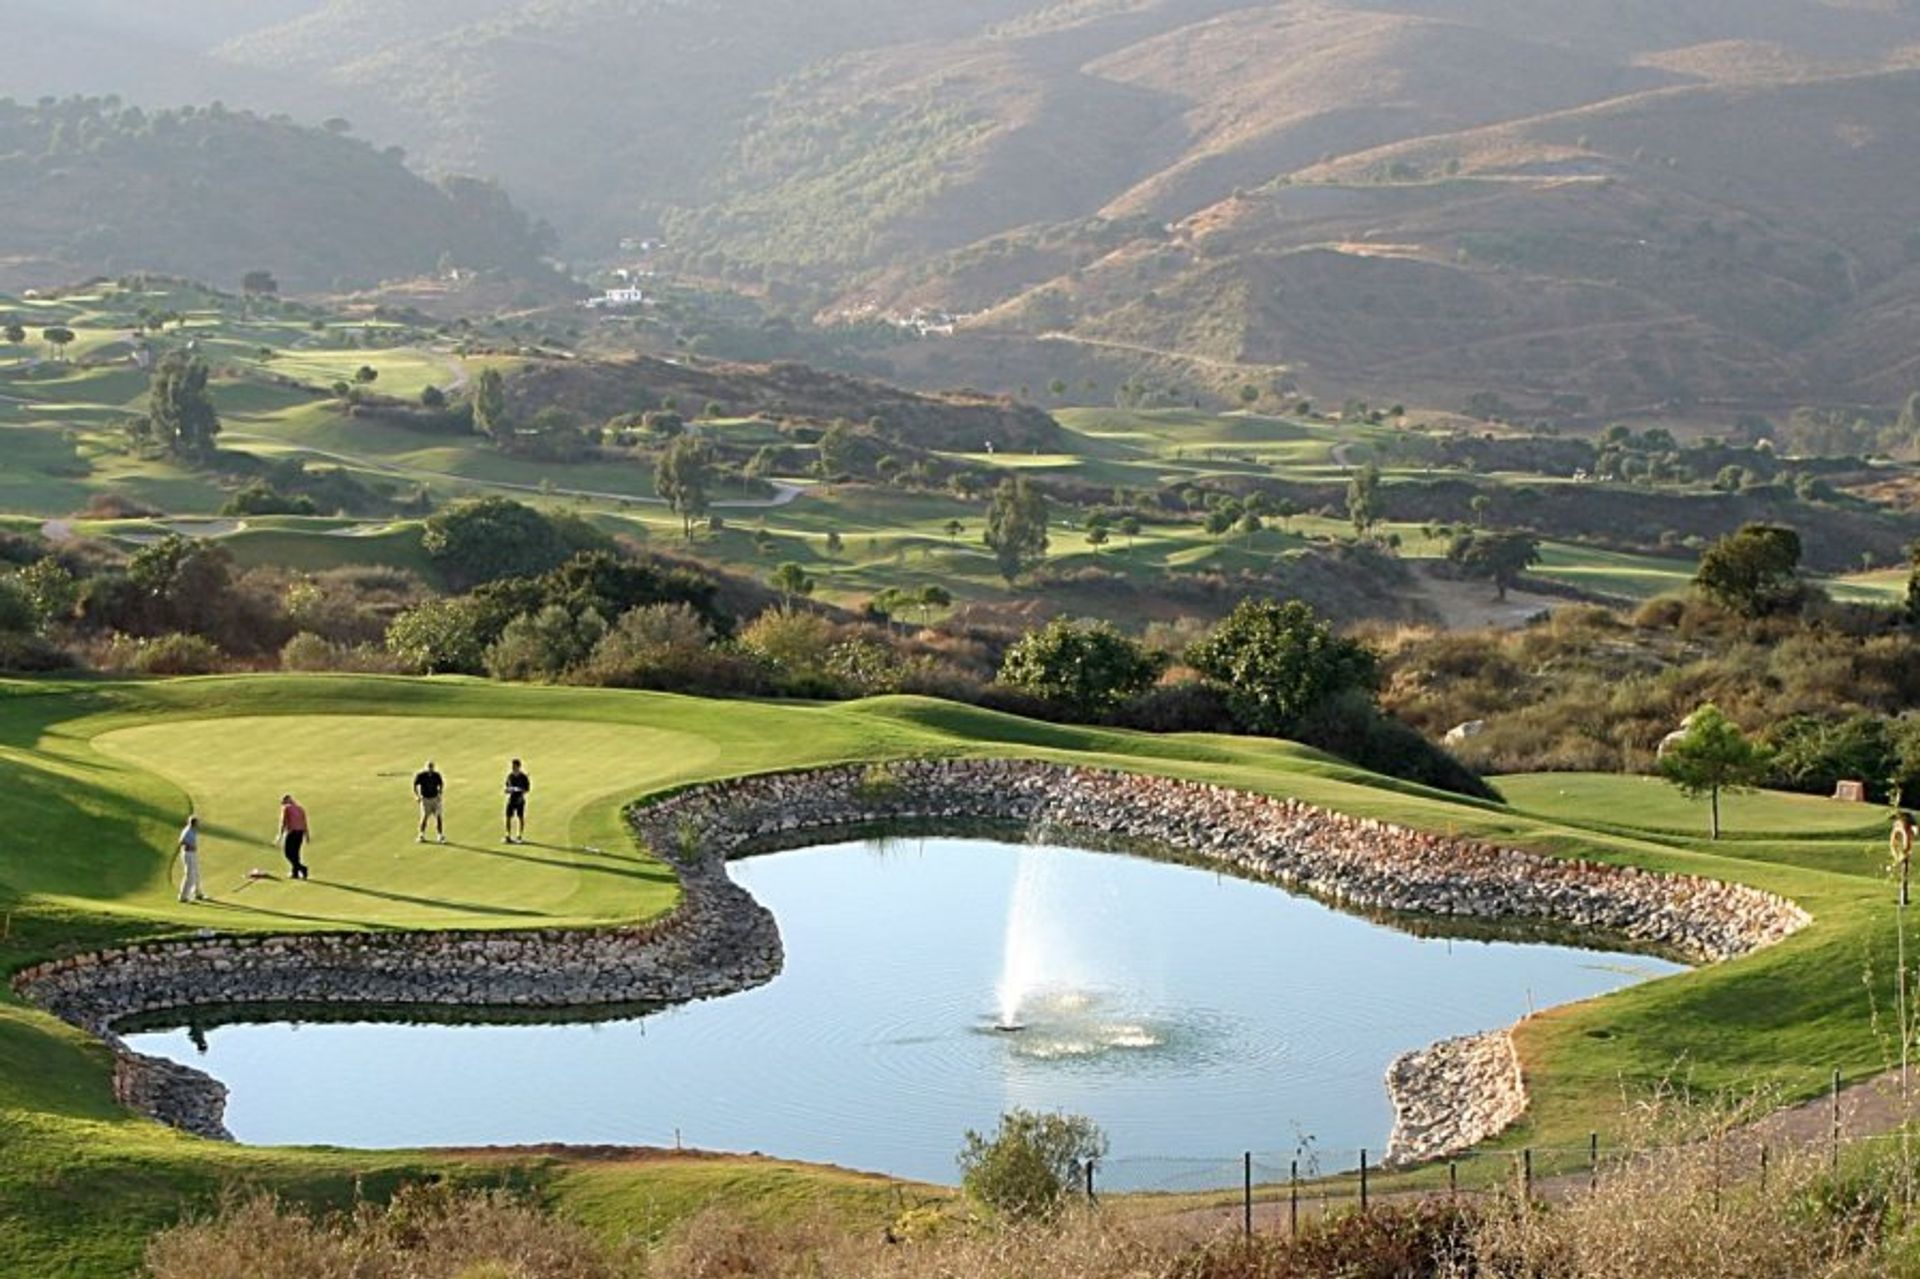 Make the most of Andalucia's most expert golf courses and practice your swing against a backdrop of lush green valleys